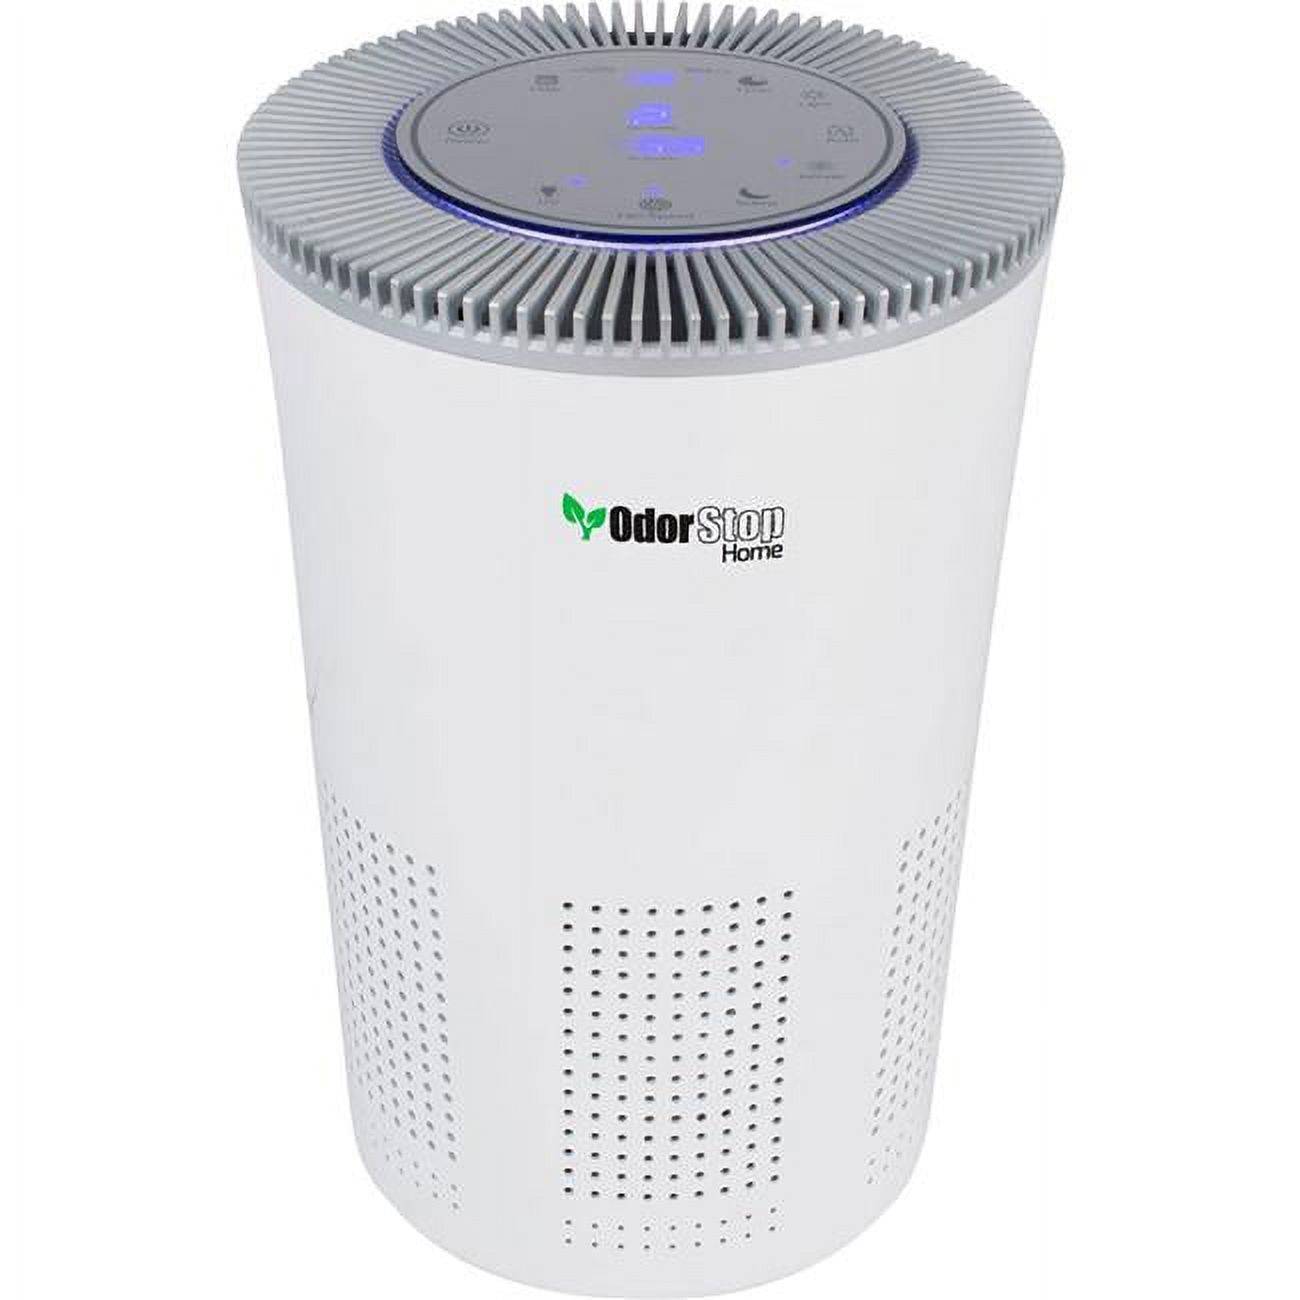 OdorStop B2375110 OSAP5W1 5-in-1 Air Purifier with H13 HEPA Filter, Active Carbon & Ionizer - White - image 1 of 3